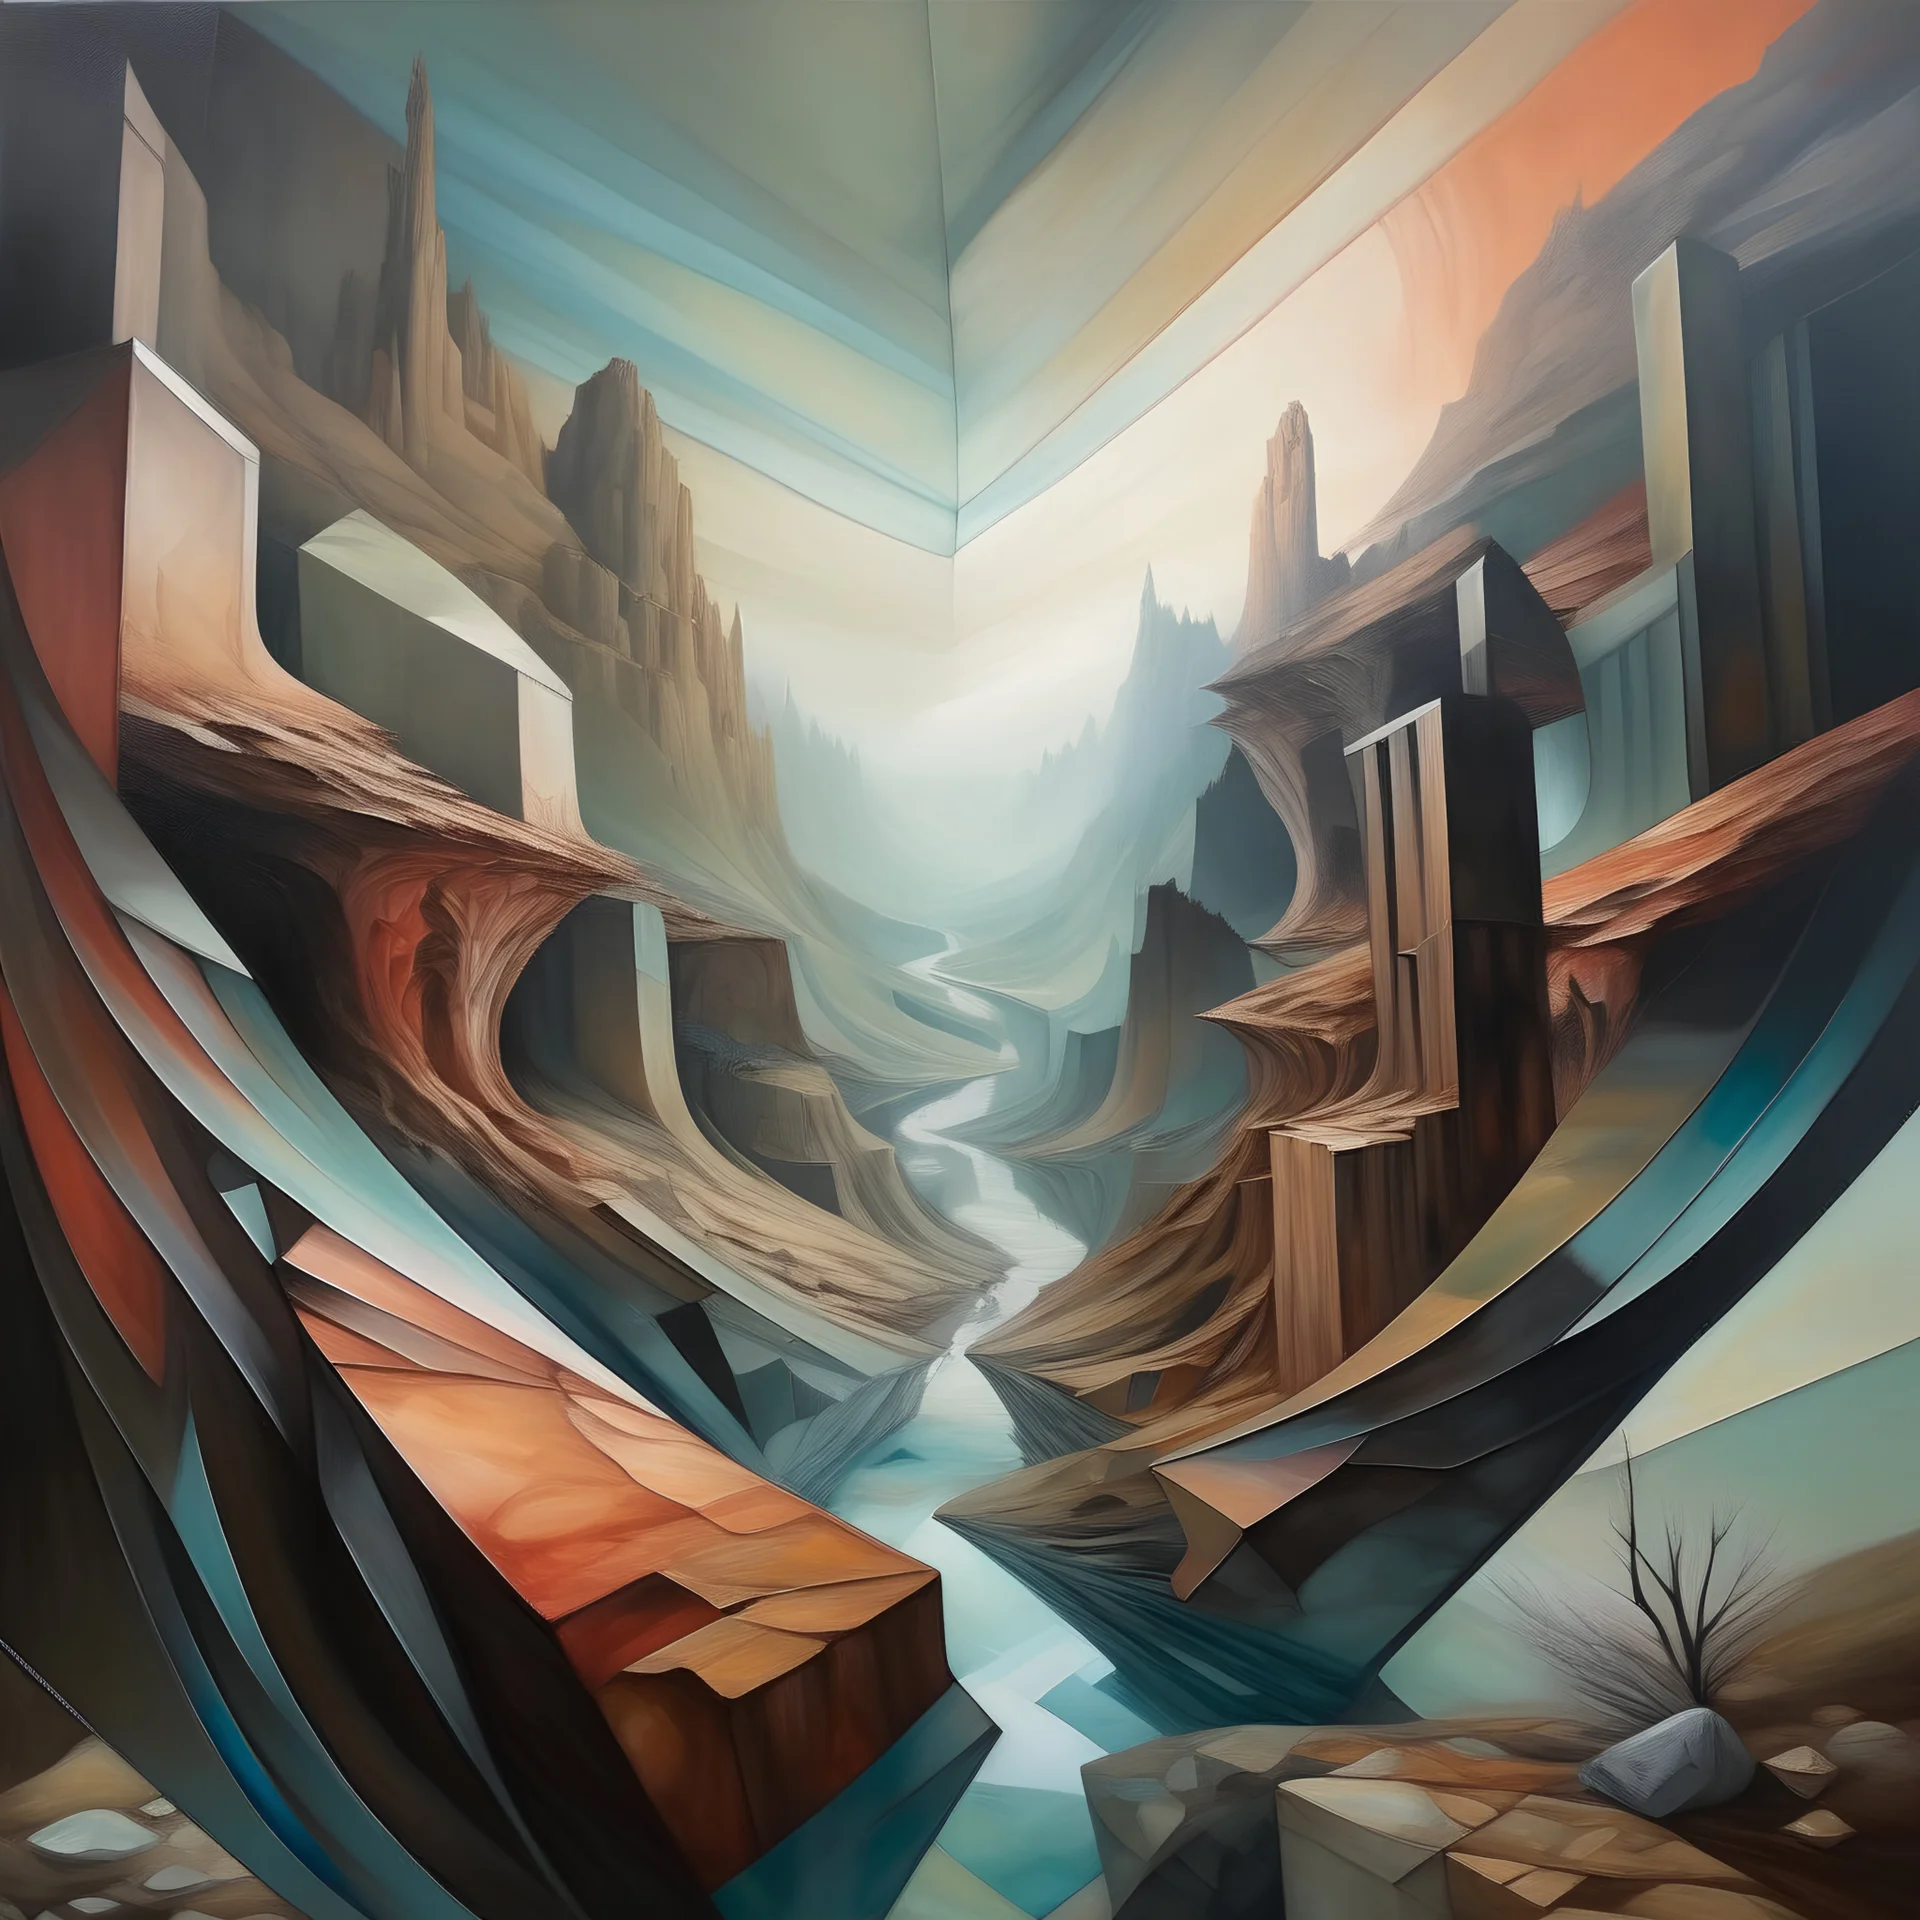 Envision a fractured landscape where perspectives shift and warp, distorting the viewer's sense of space and scale. Unexpected angles and distorted proportions create a sense of disorientation that encourages viewers to linger and explore the surreal landscape.